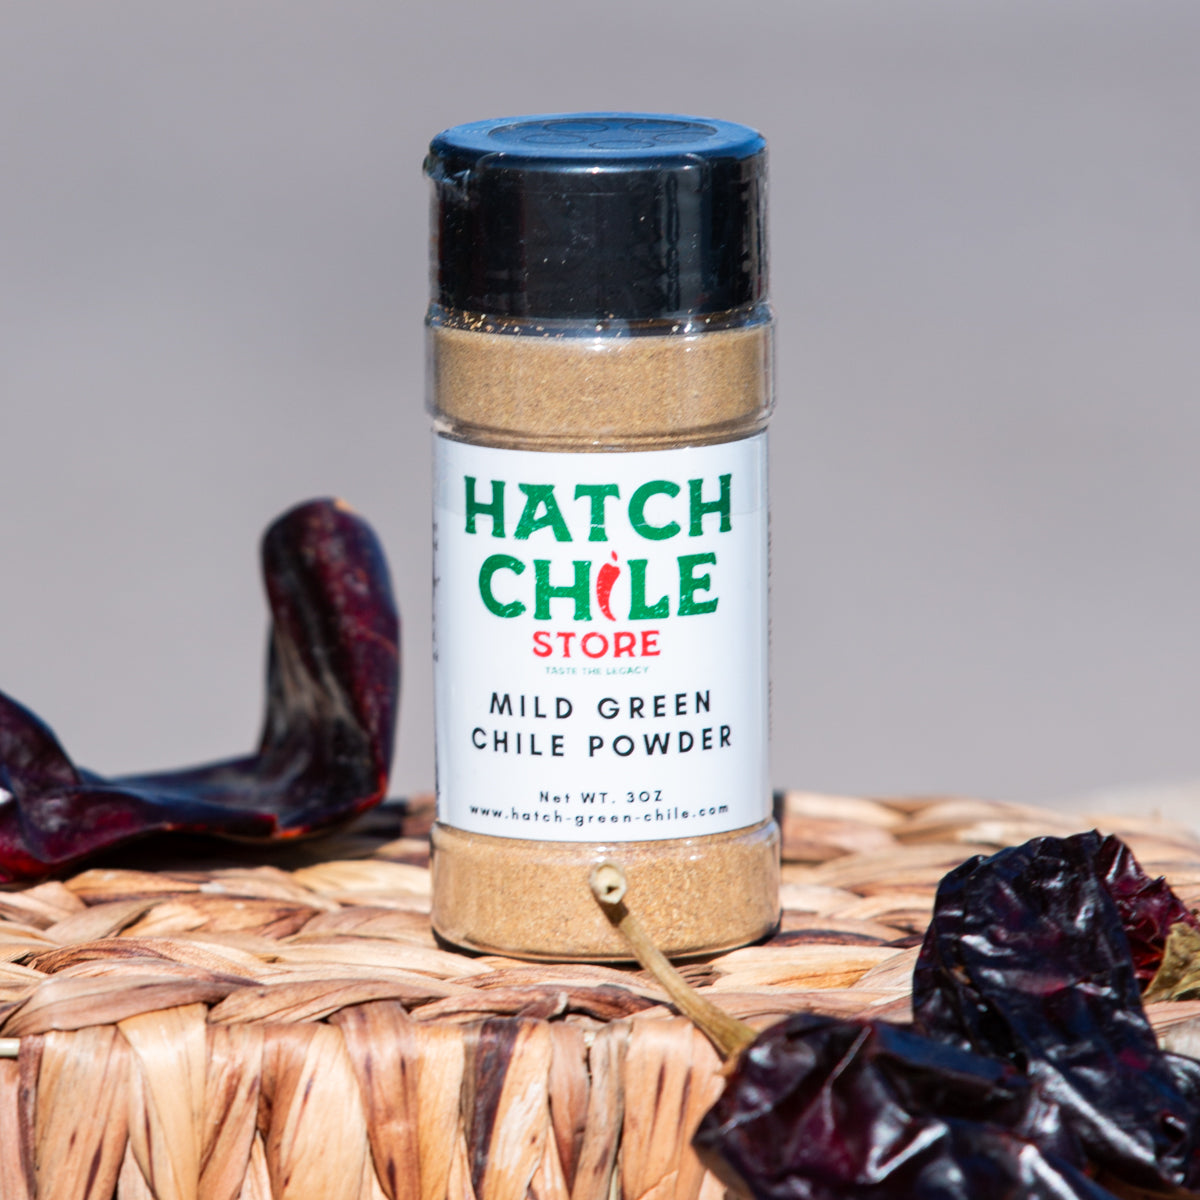 A bottle of Green Chile Powder, surrounded by dried red chiles on a woven mat, against a neutral background.